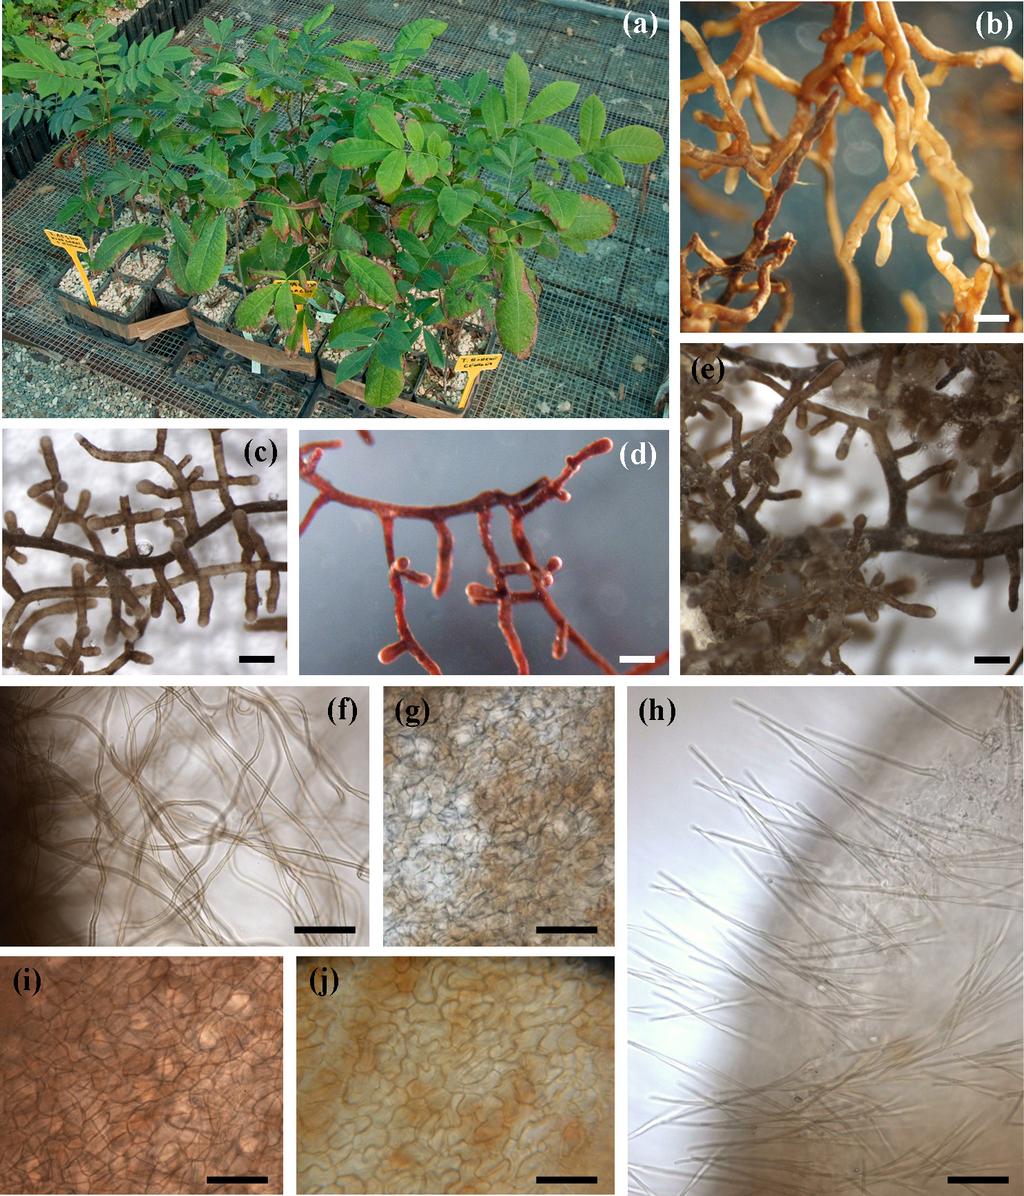 Mycorrhizal inoculation 181 Fig. 1. Pecan seedlings and morphology of T. aestivum, T. borchii, T. indicum and T. lyonii ECM. (a) Pecan seedlings in the nursery; (b) T.